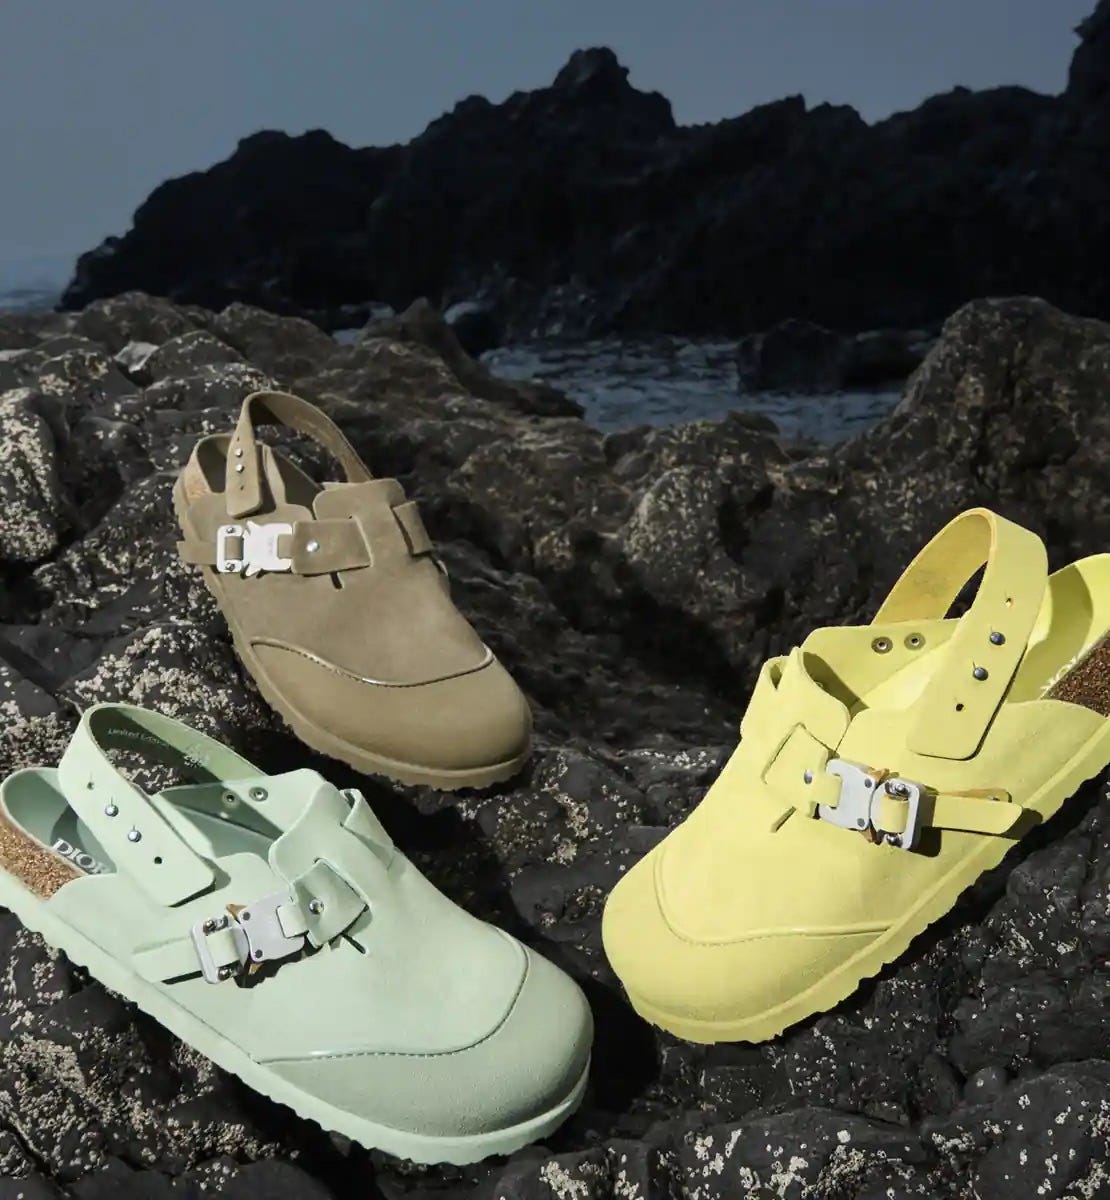 Birkenstock: shoe brand everyone's obsessed with, by SELESTA